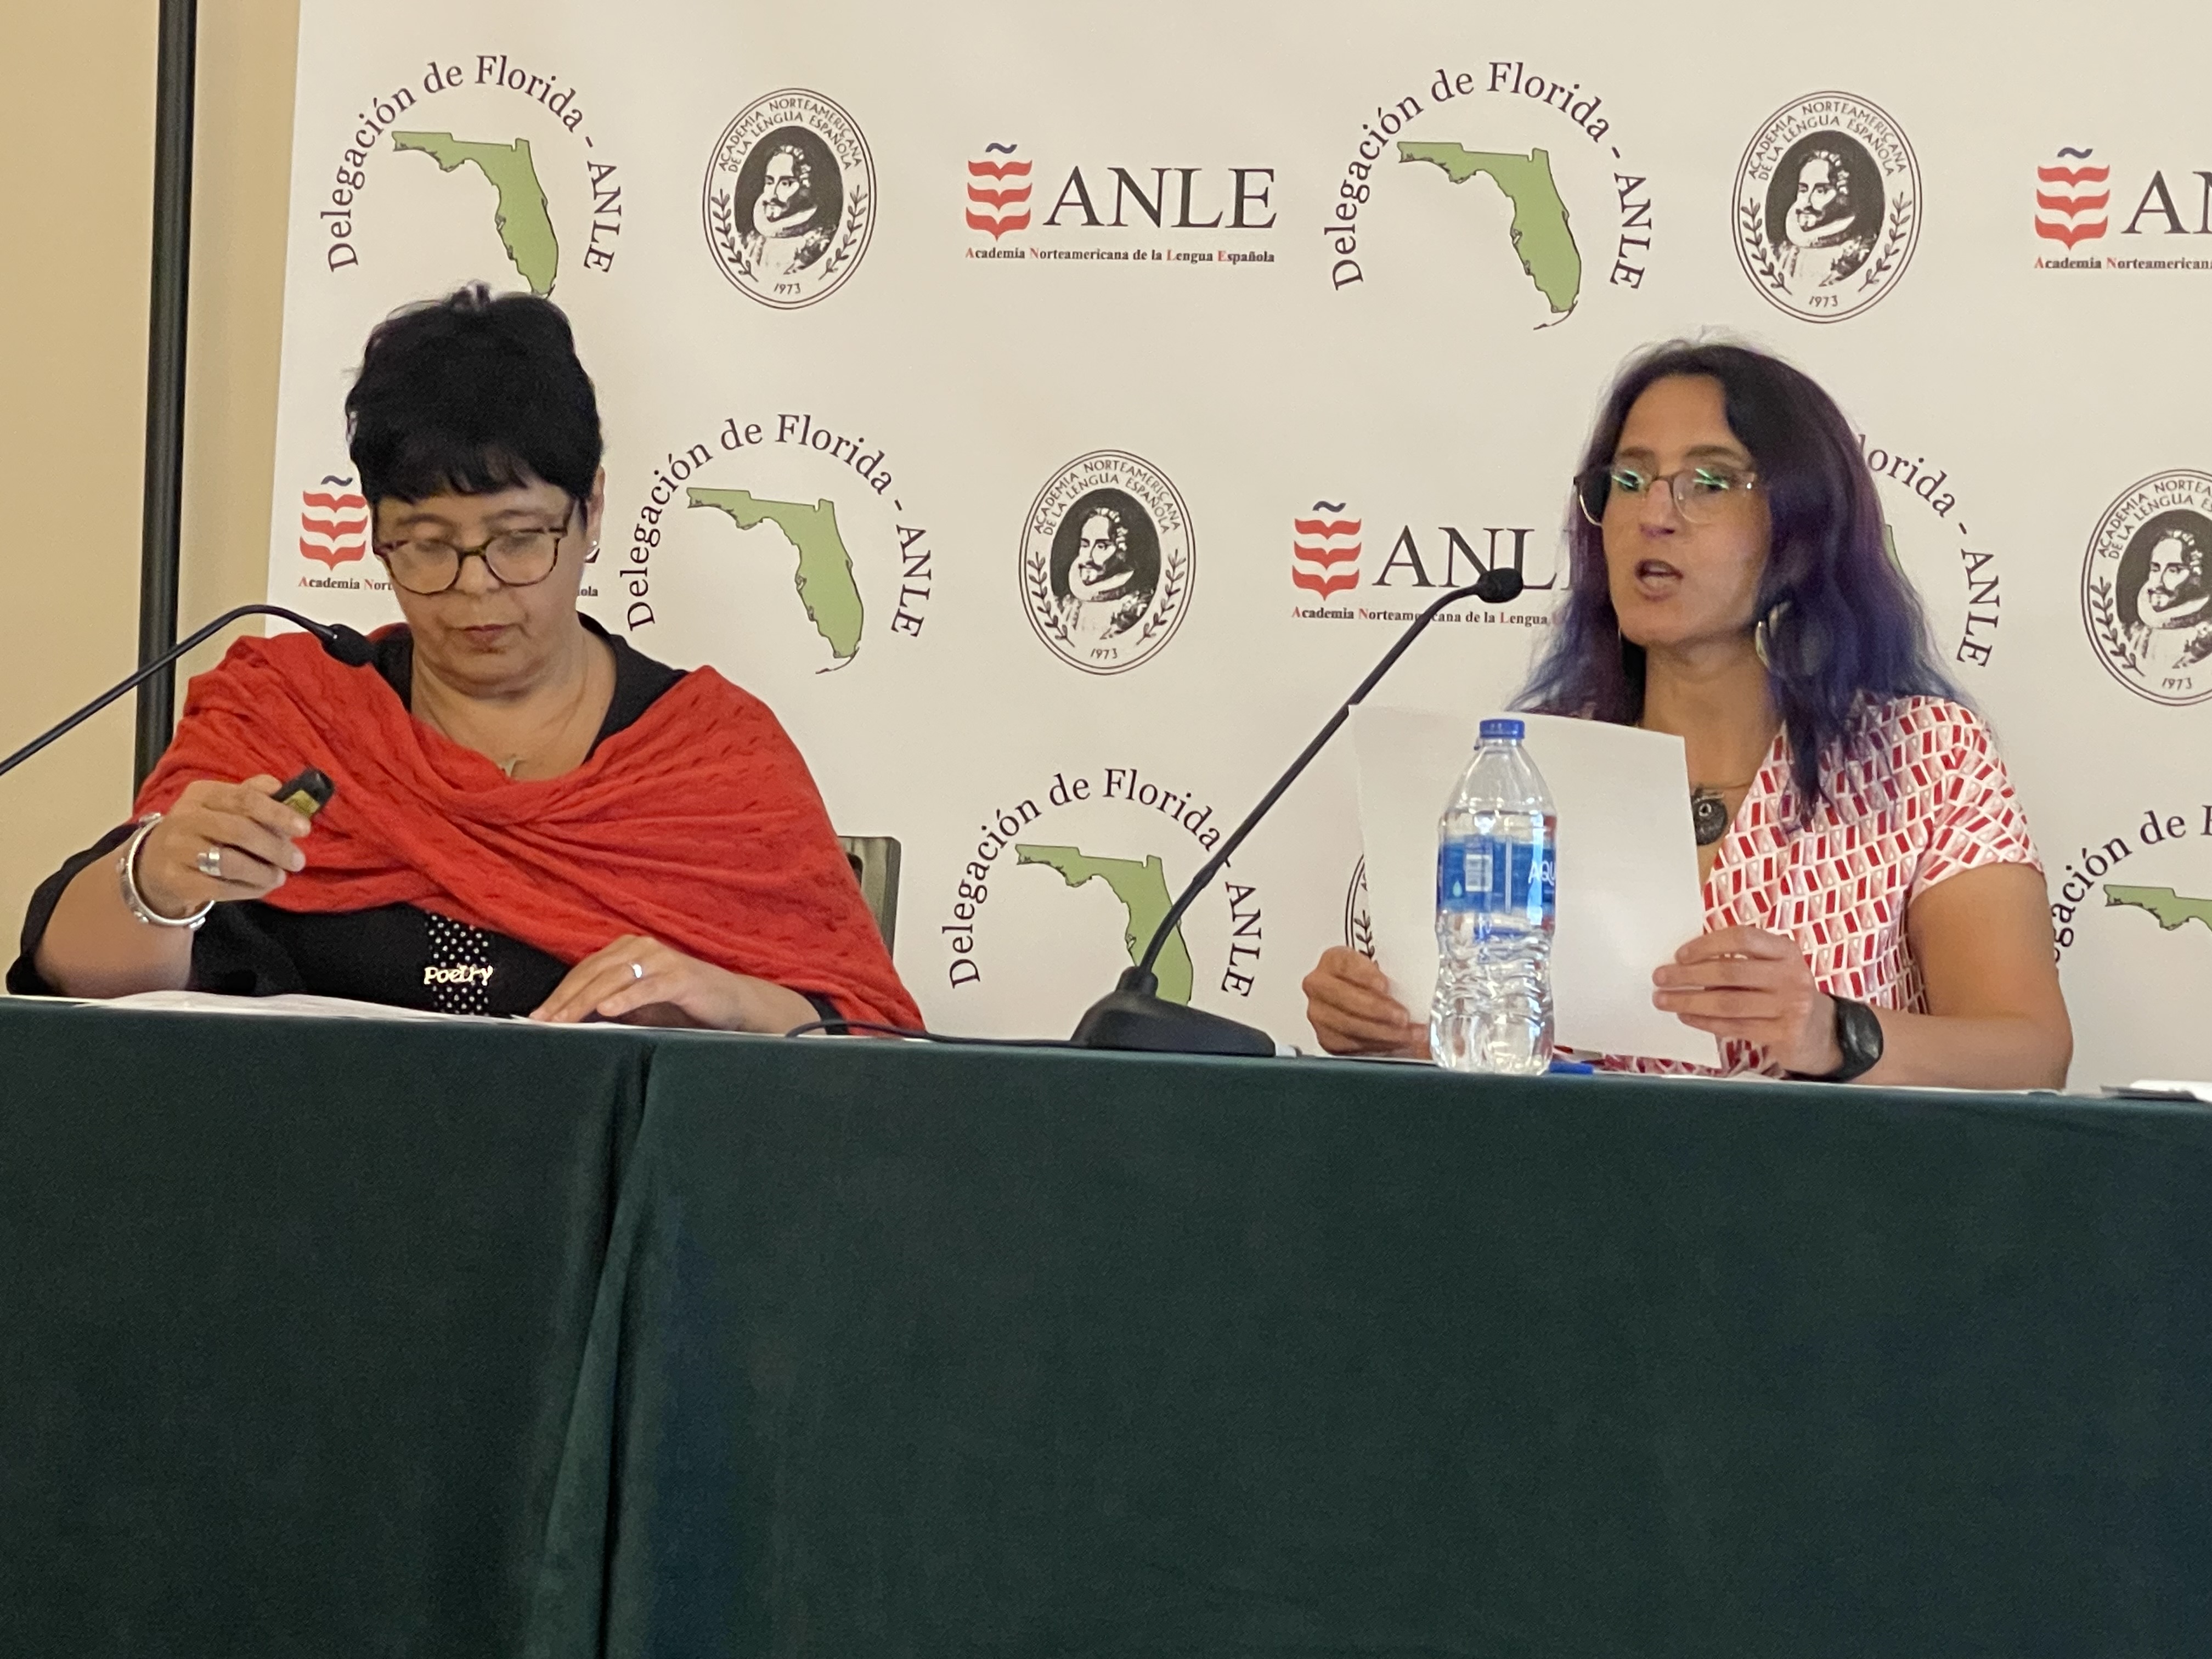 The image shows Aurora Humarán and Erika Cosenza seated at a table with microphones. Behind them, ANLE's logo. Erika is speaking.